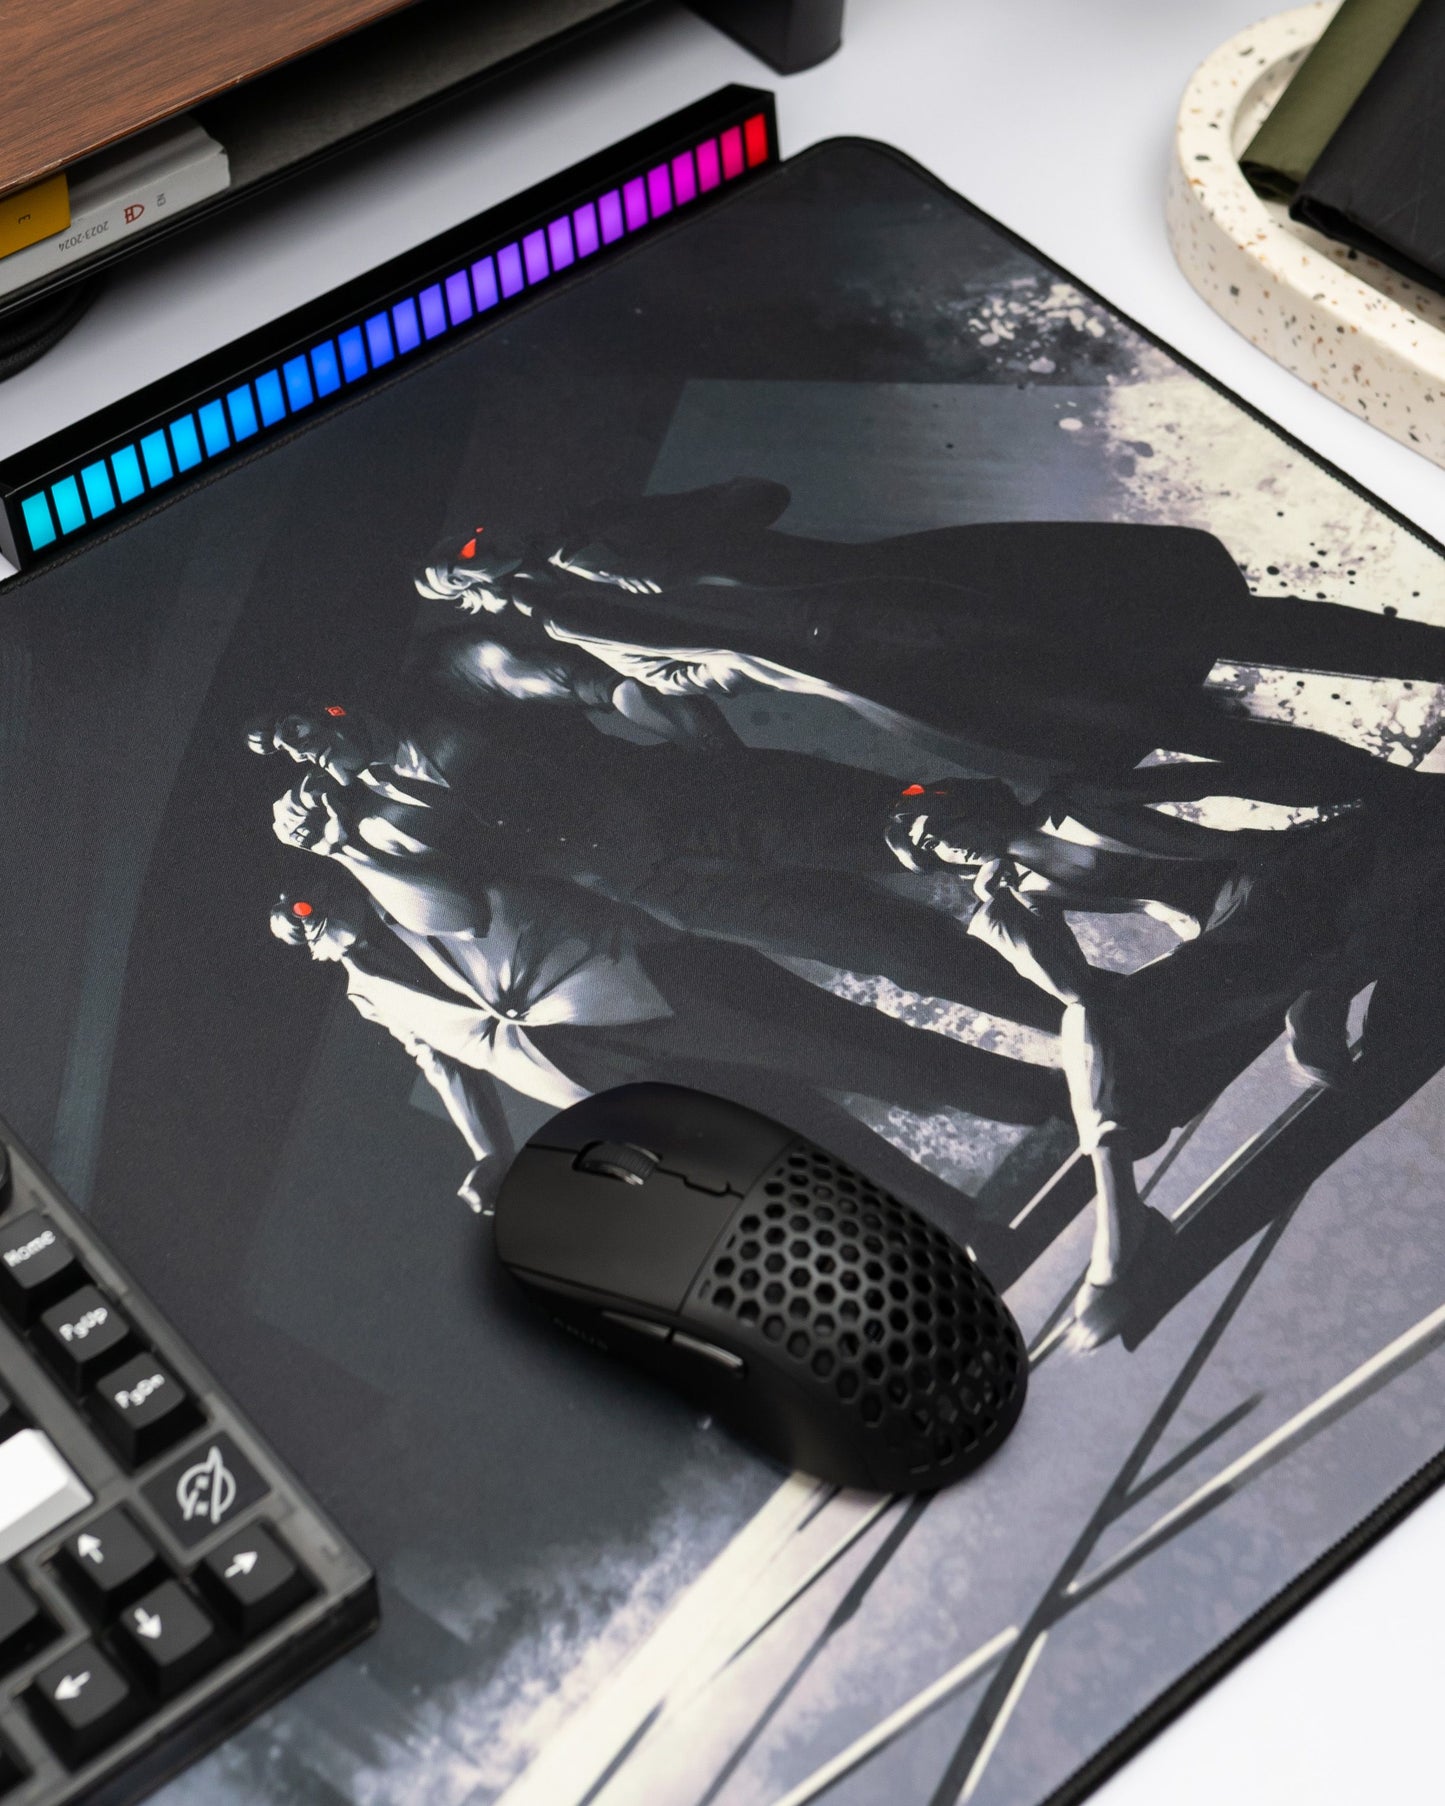 UNDERCOVER Symbio.keys x Press Play Gaming Mousepad Deskmat by Press Play